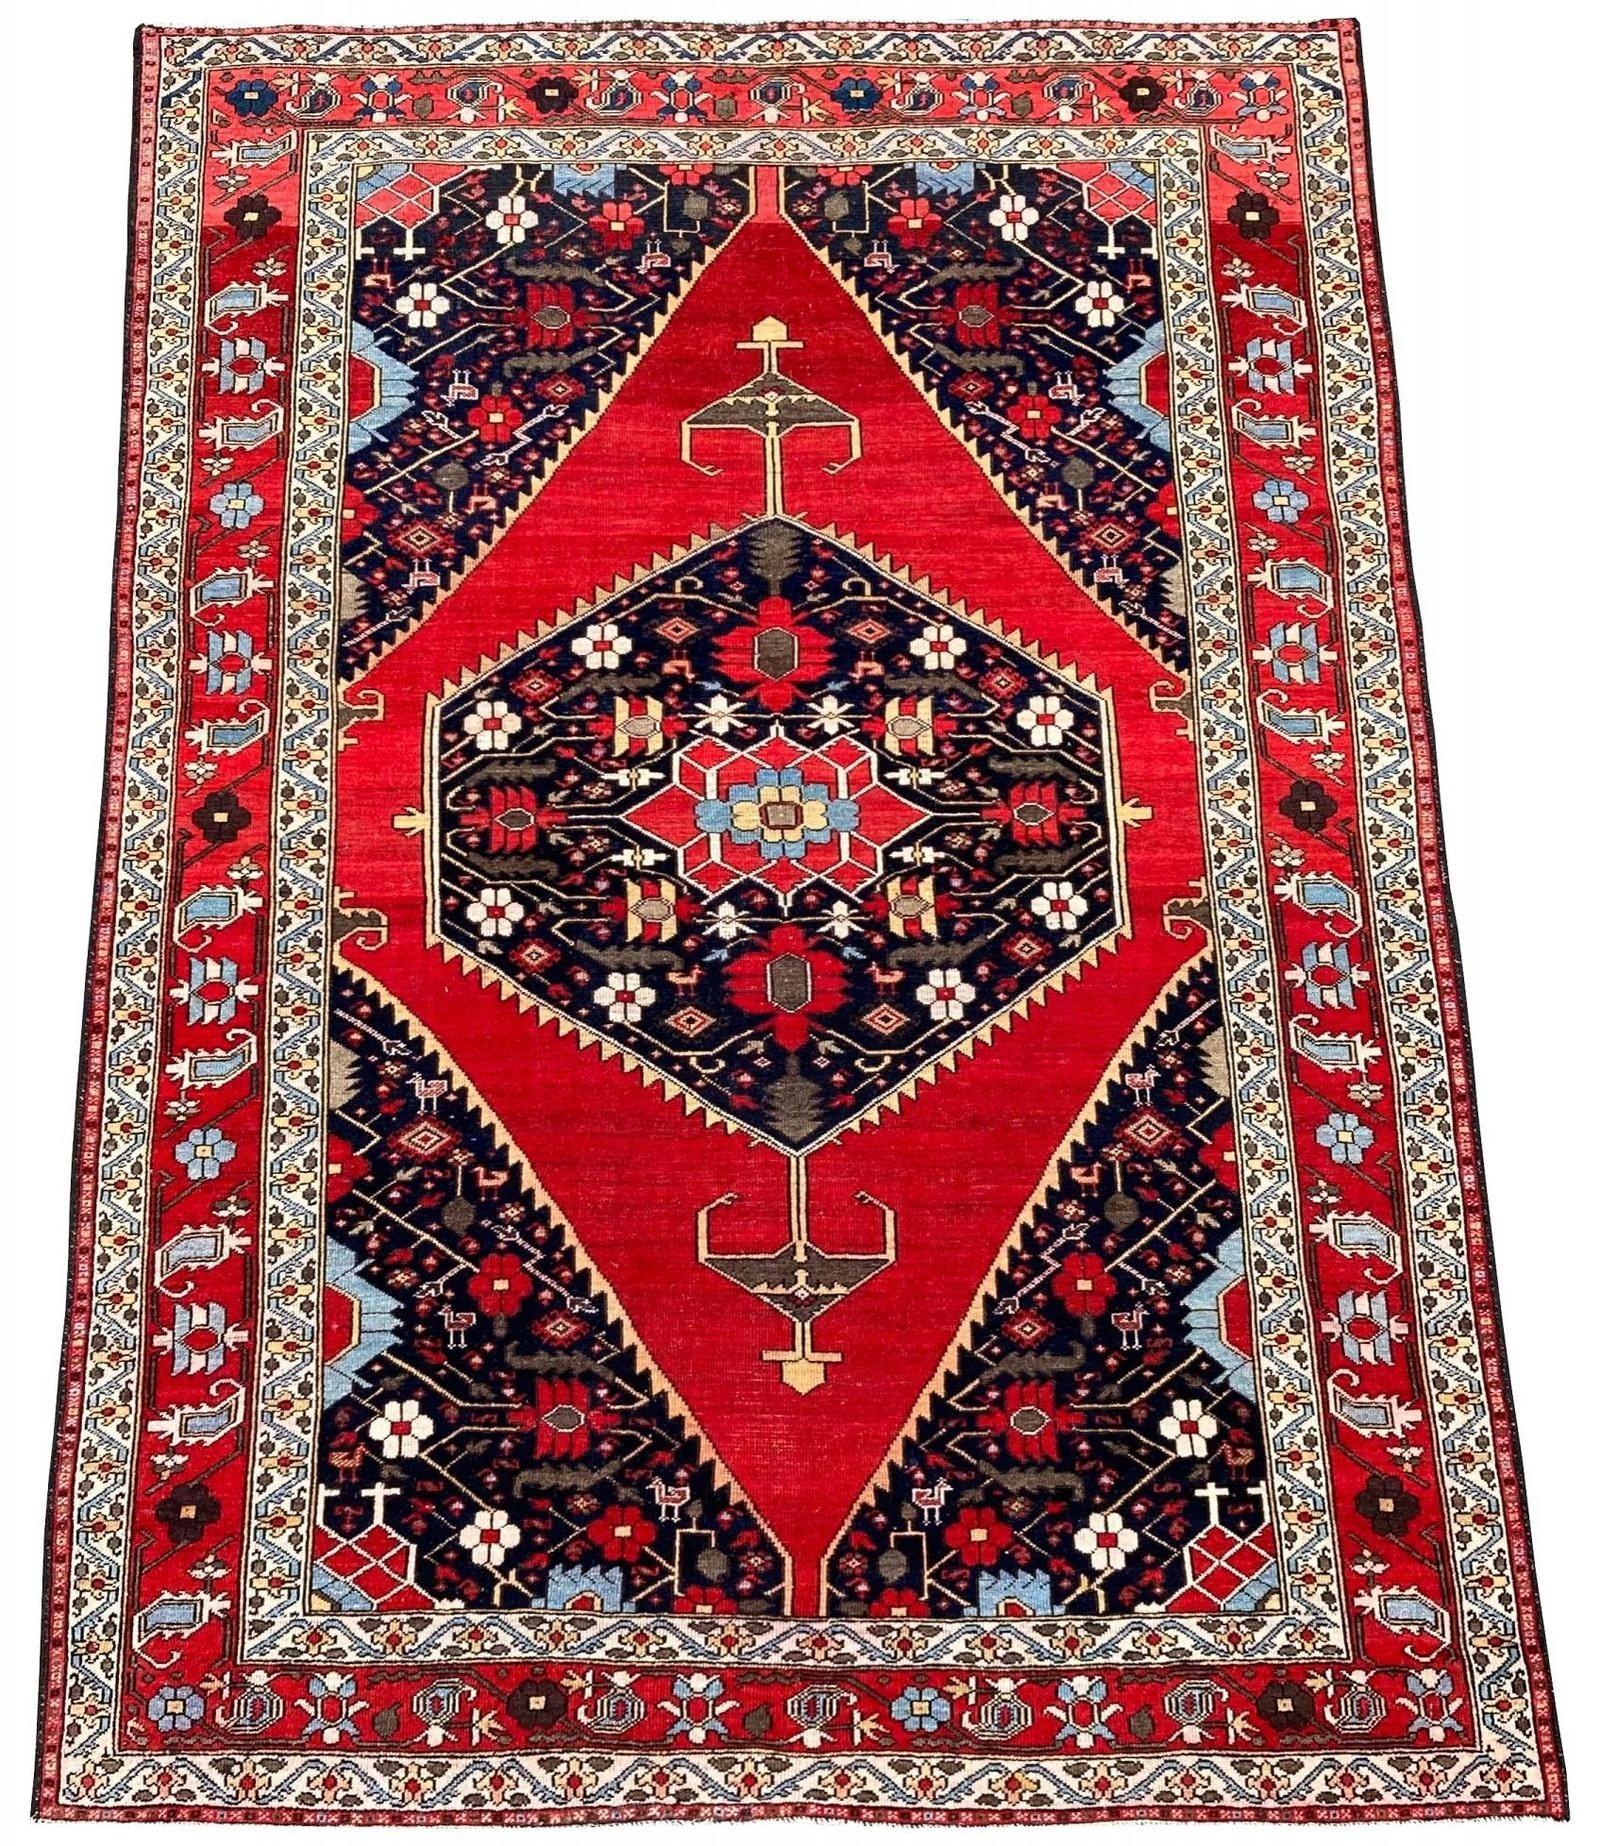 A beautiful antique Mazalagan rug, handwoven circa 1900 with a hexagonal medallion of stylised flowers on a plain red field. Note the small animal motifs in the corner spandrels. Finely woven and lovely wool quality.
Size: 1.87m x 1.41m (6ft 2in x